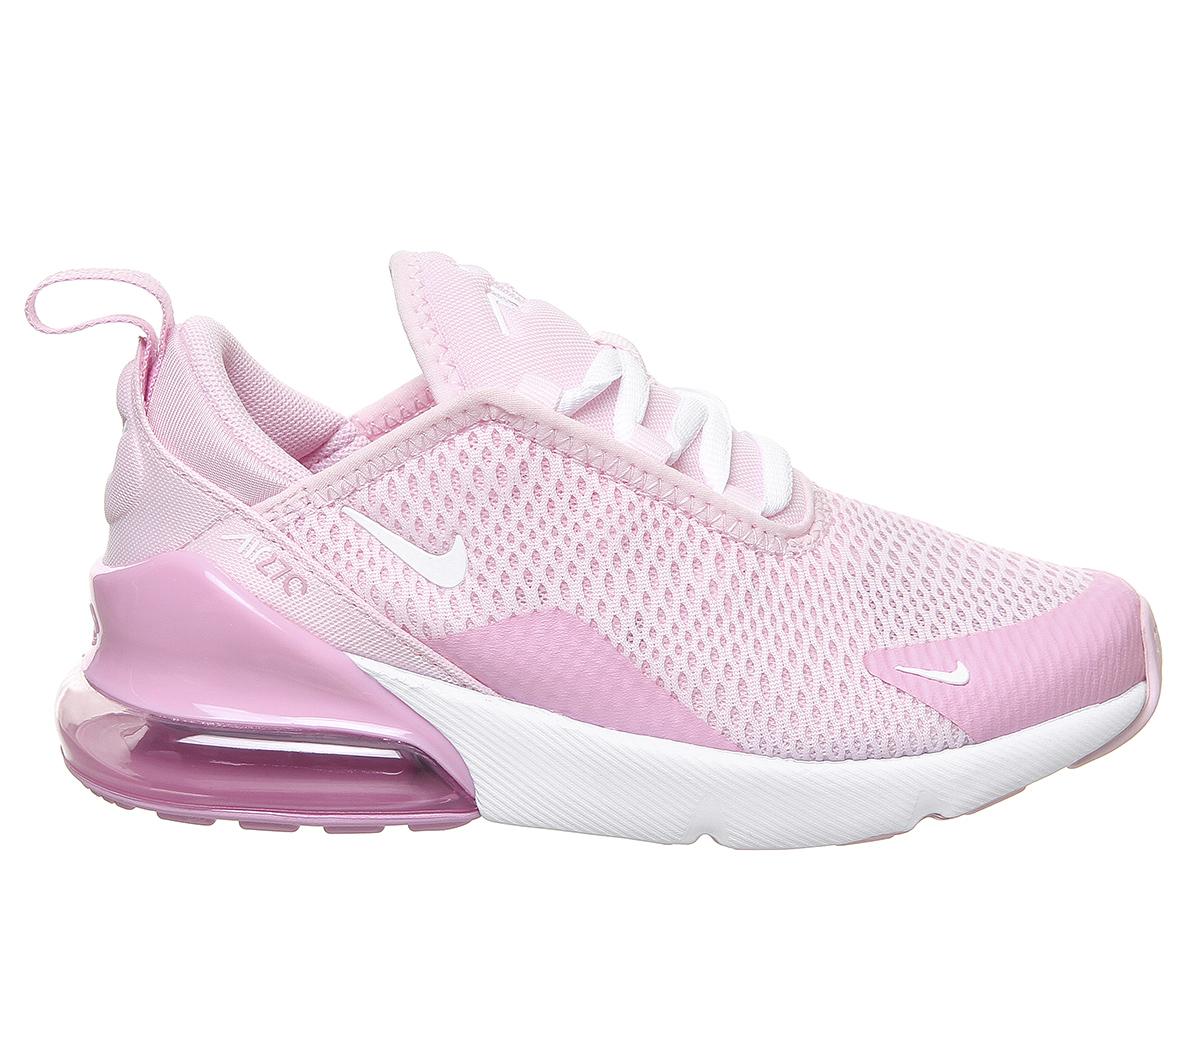 Nike Air Max 270 Ps Trainers Pink Foam White Pink Rise - Unisex